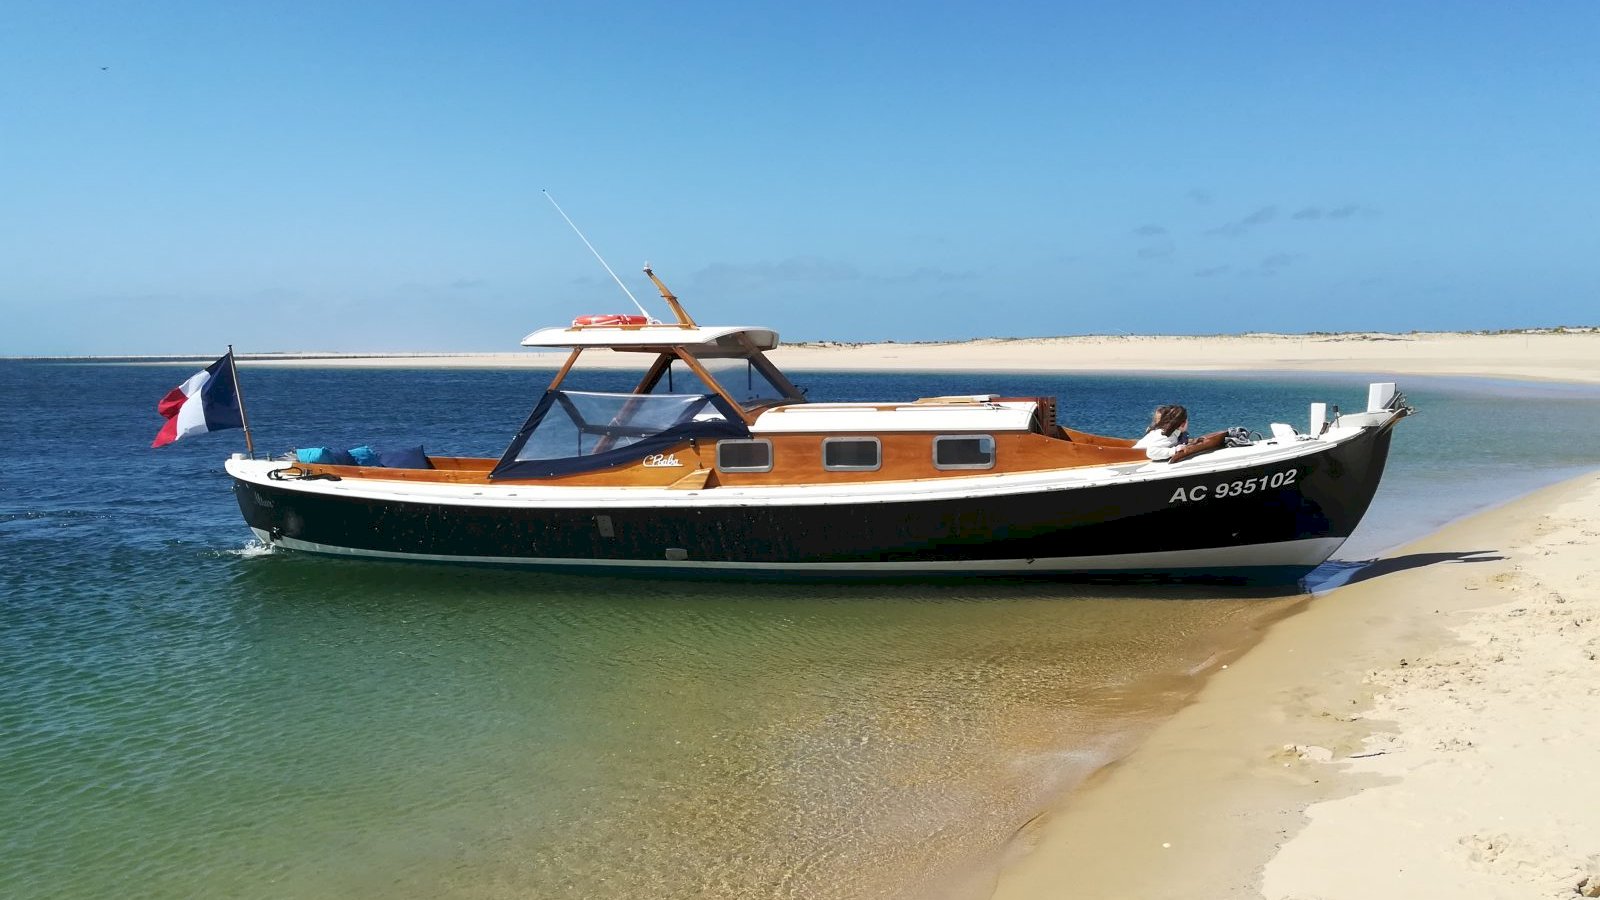 Ophorus Tours - 3-hour Traditional Pinasse Boat Trip on Arcachon Bay